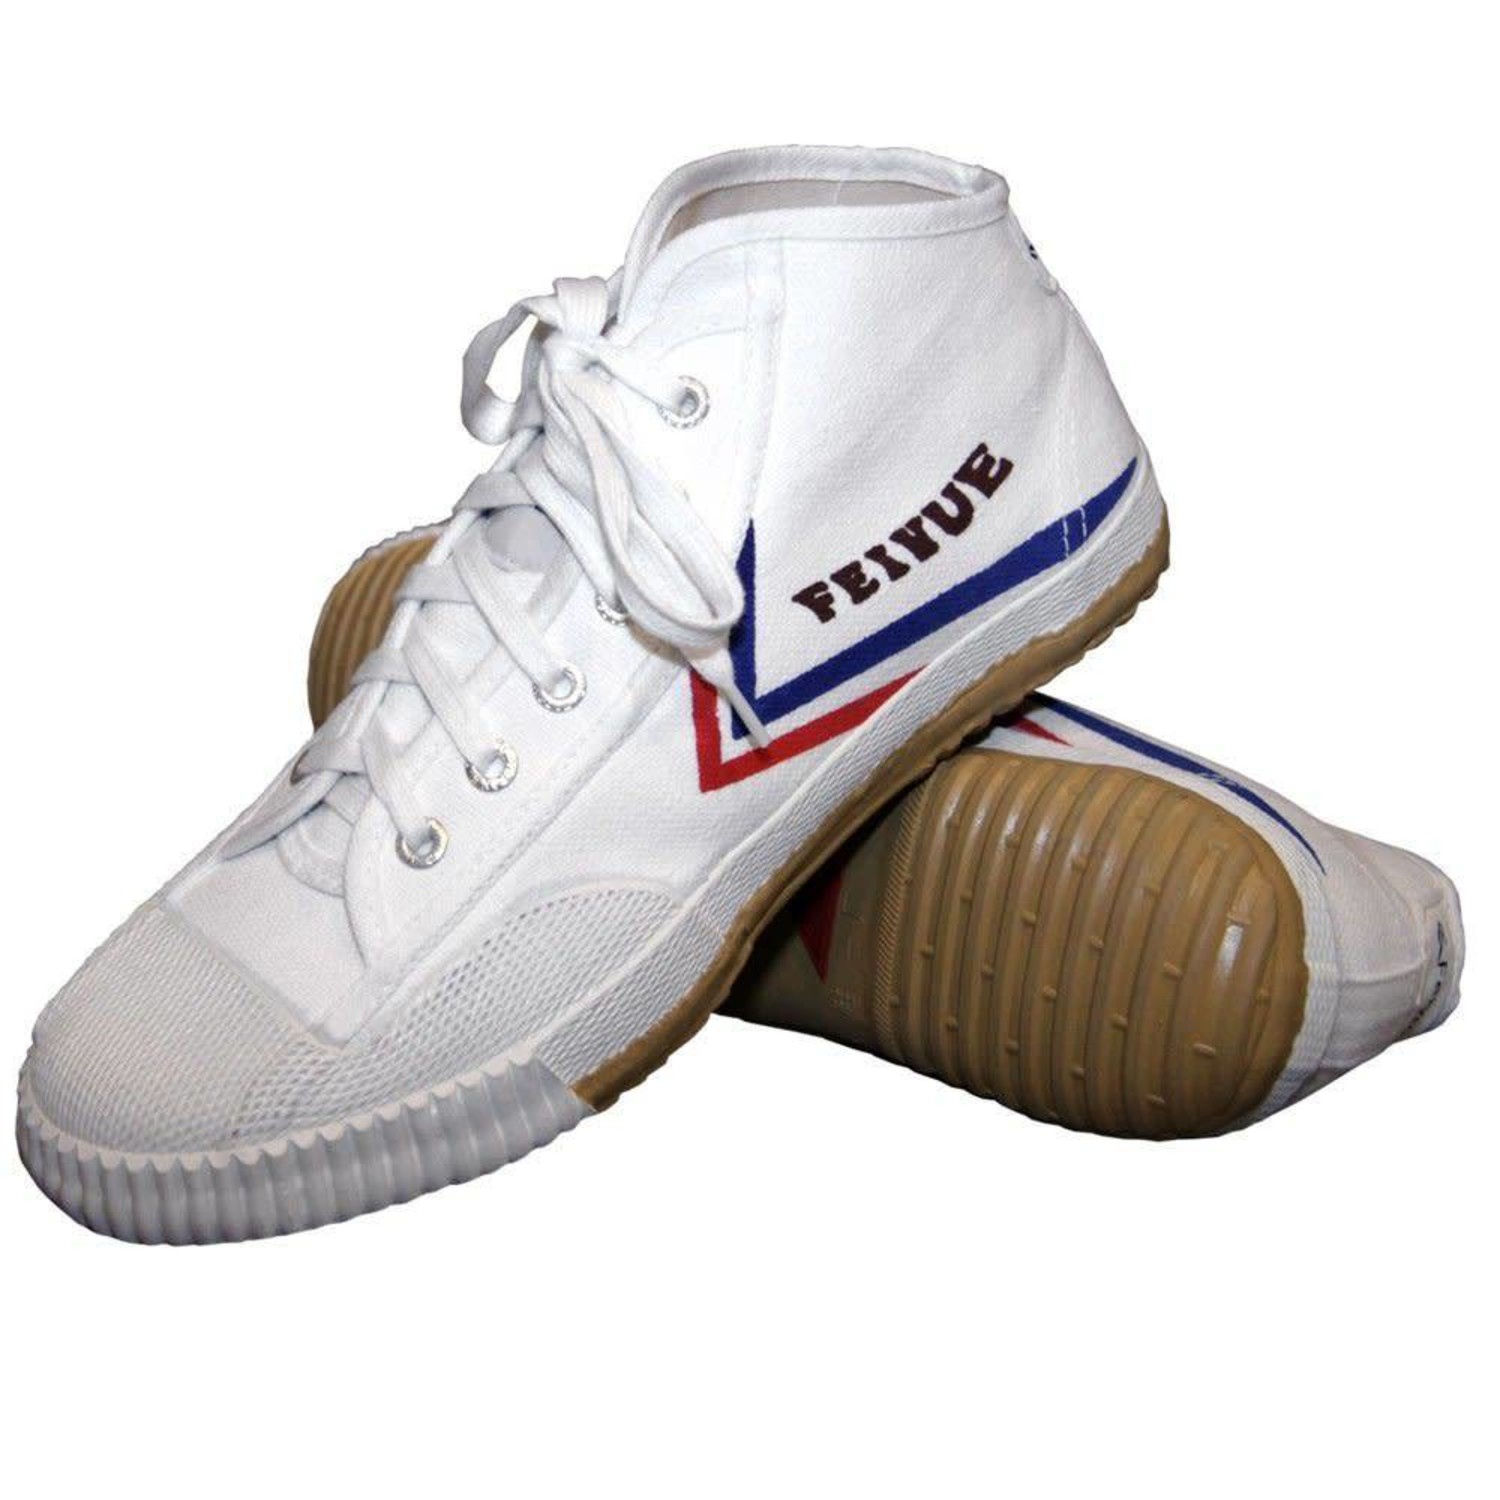 Unisex Feiyue Classic Shoes - Used by Shaolin Monks & Parkour Athletes